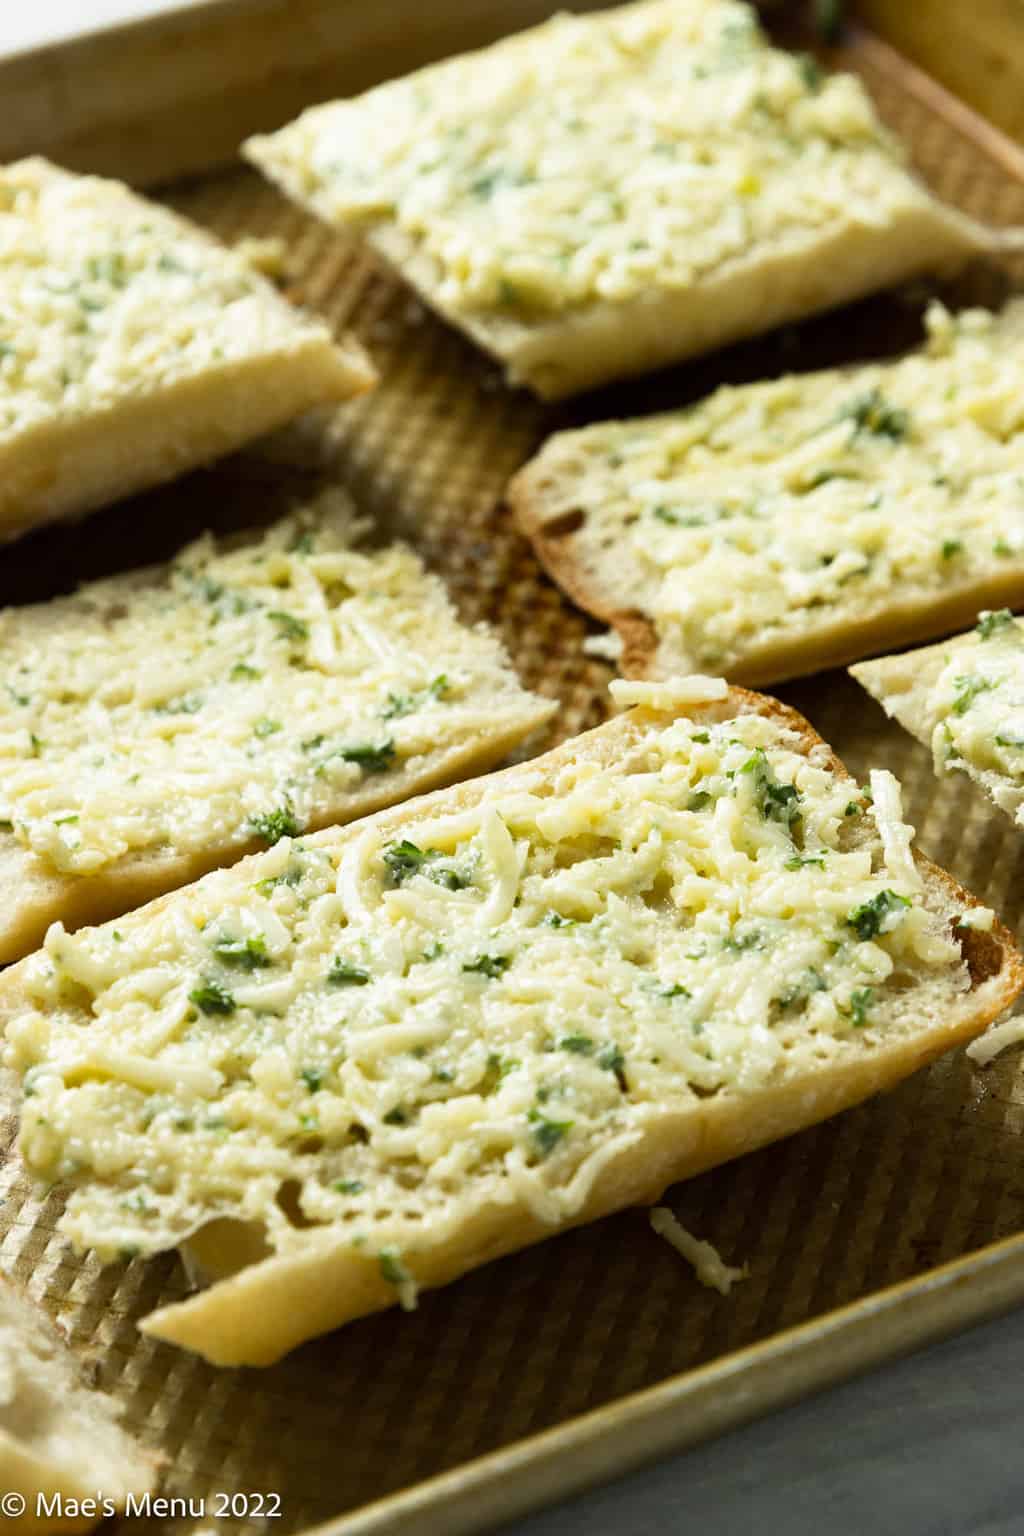 An up-close shot of small pieces of bread brushed with garlic butter.